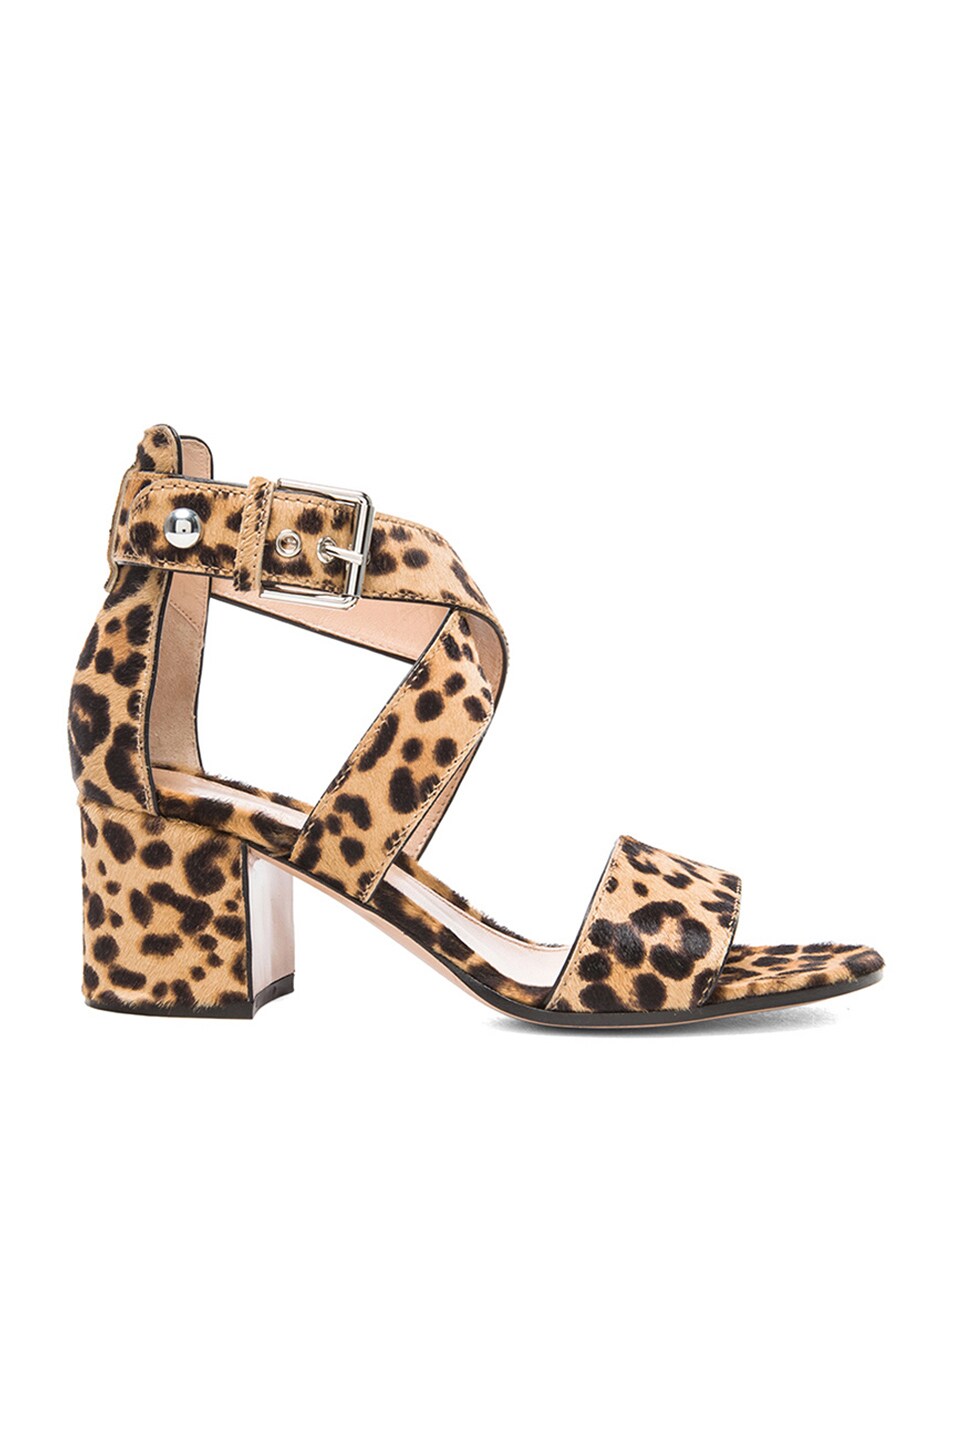 Image 1 of Gianvito Rossi Heeled Sandals in Black Leopard